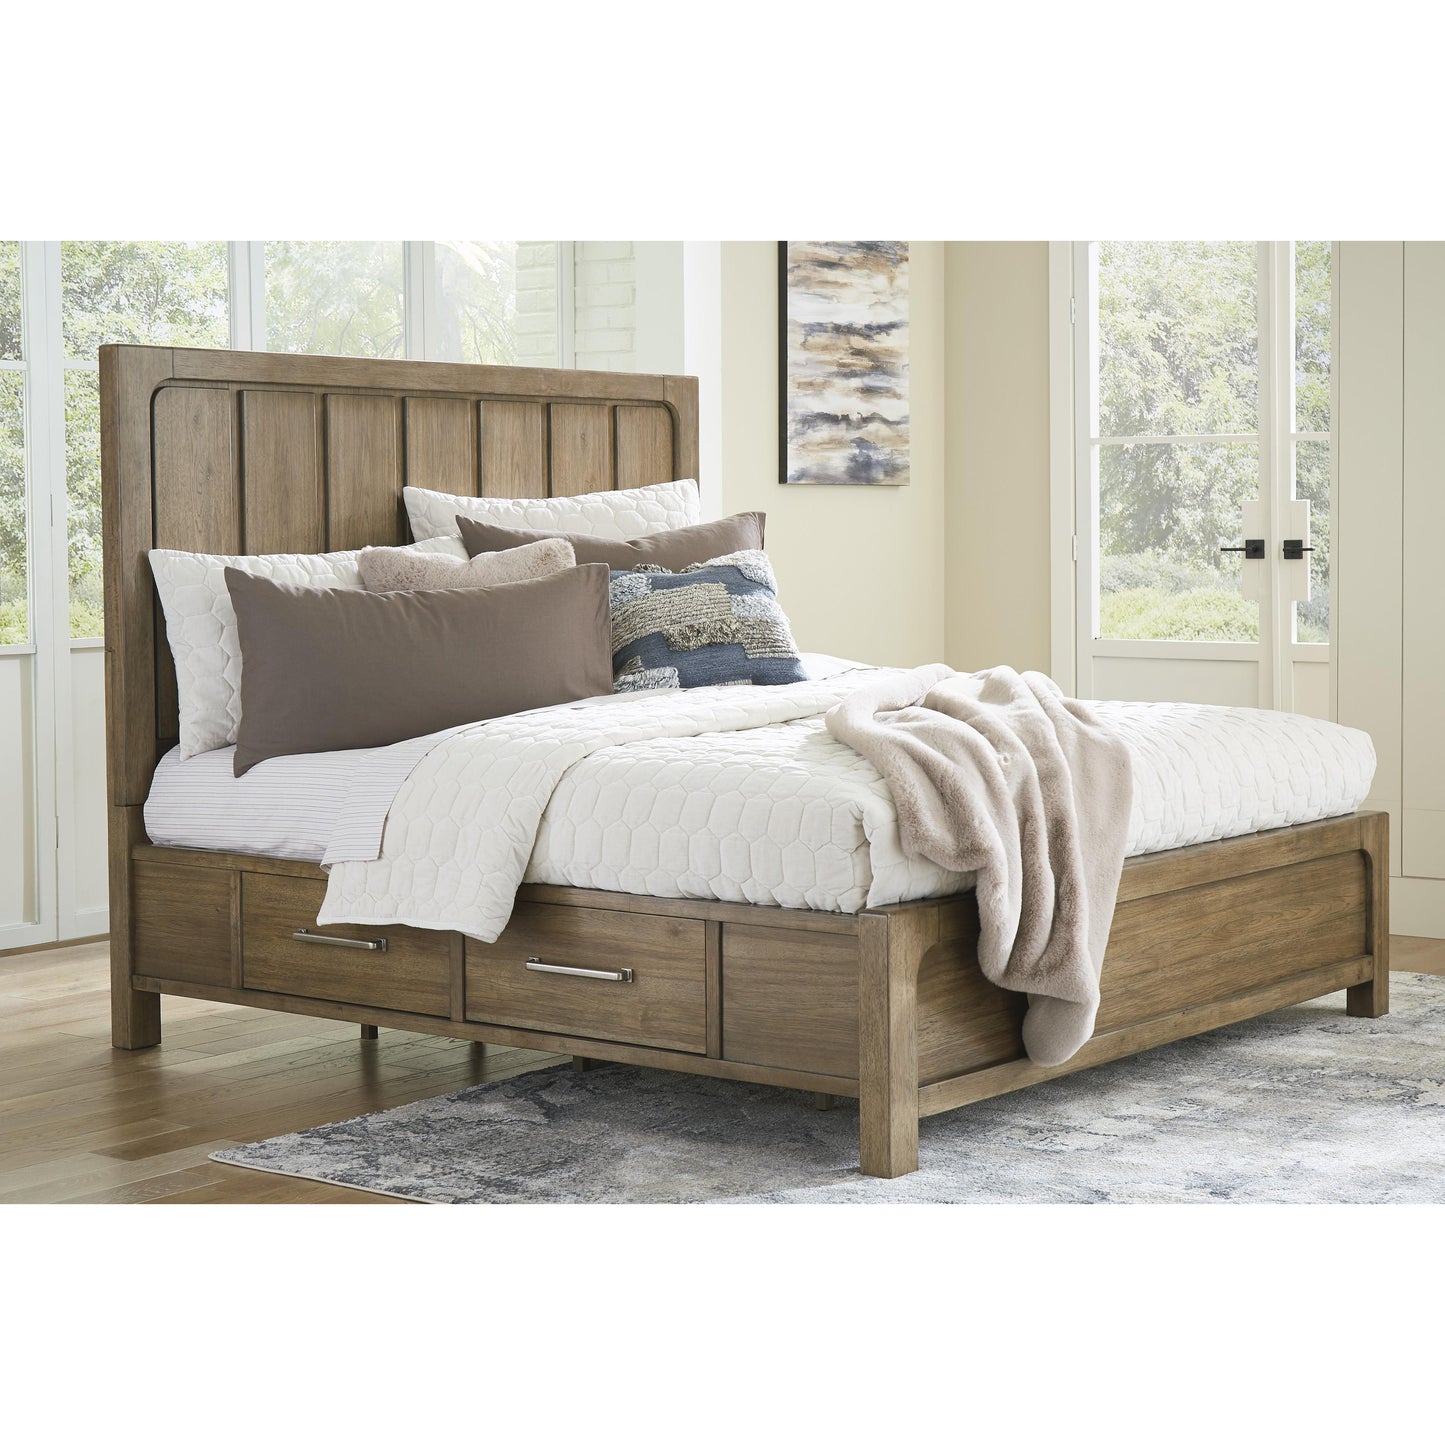 Signature Design by Ashley Cabalynn King Panel Bed with Storage B974-58/B974-56/B974-97S/B974-50 IMAGE 7